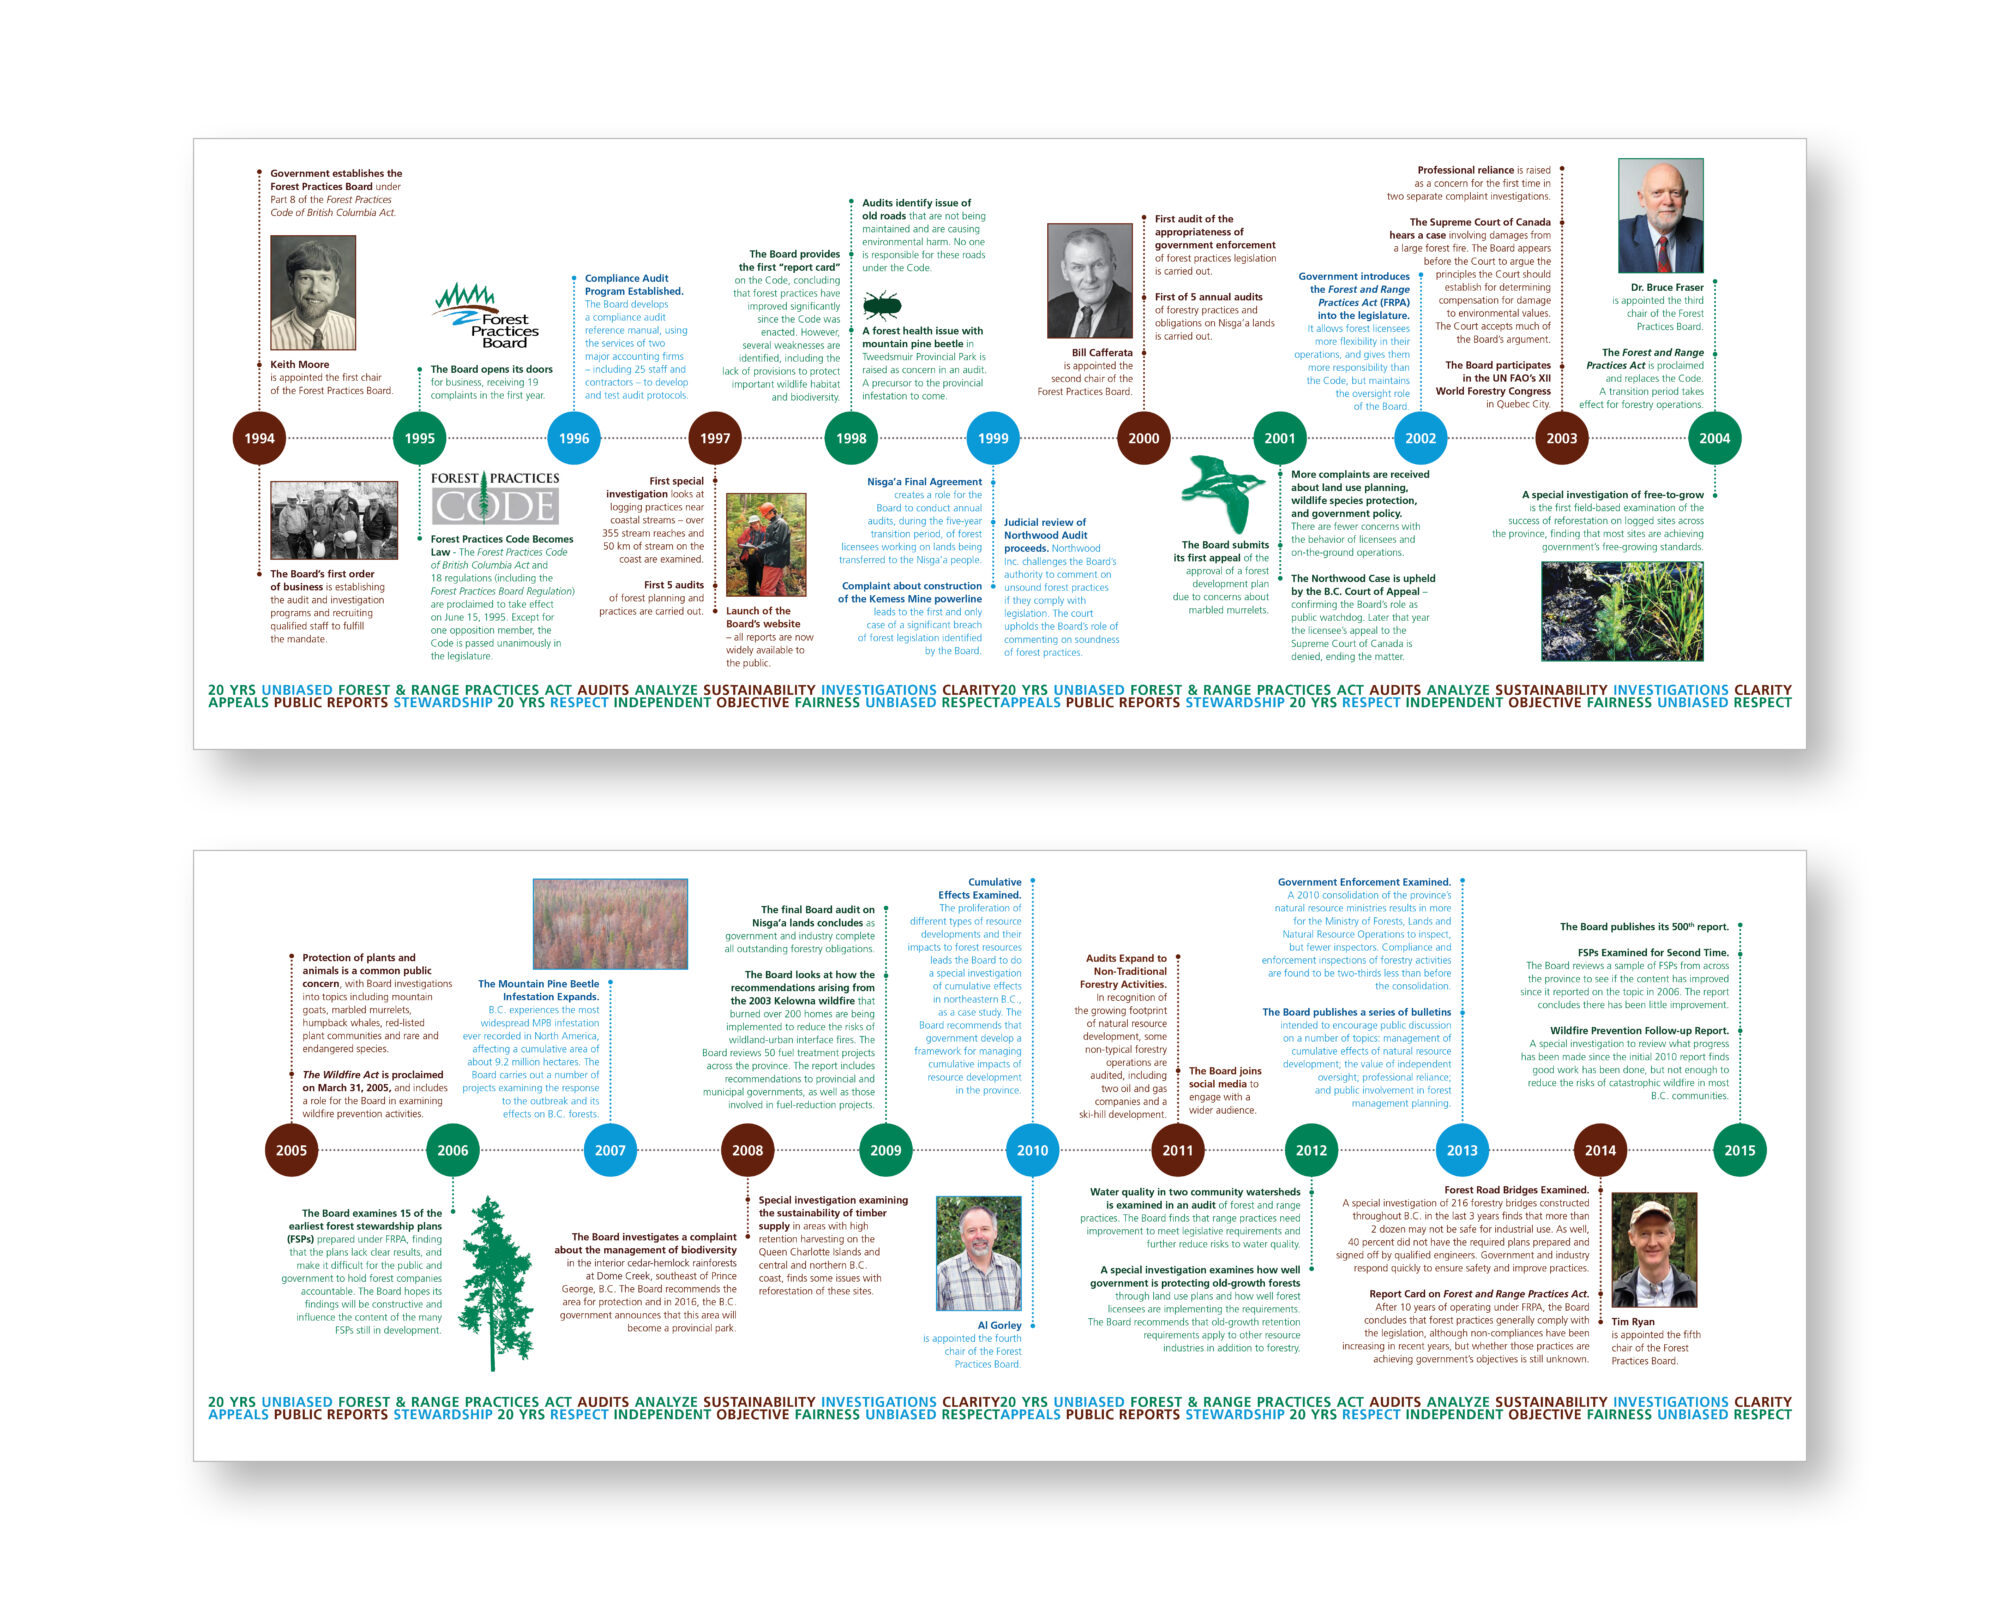 Forest Practices Board - 20 Year Anniversary Timeline Infographic